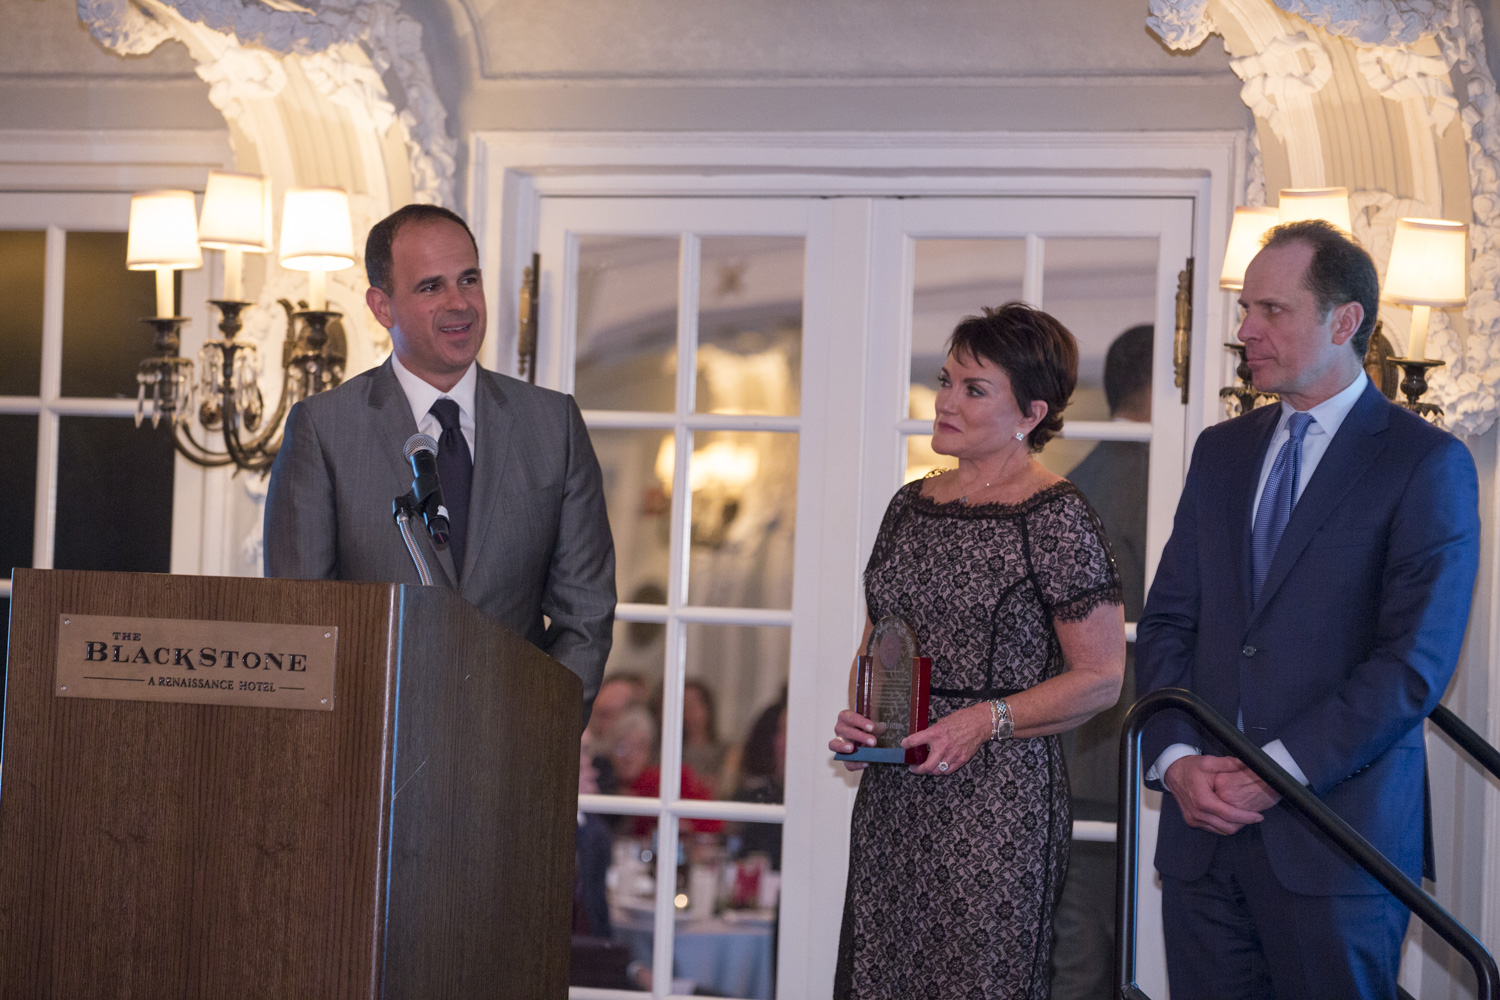 Marcus Lemonis and Beth Levine Honored by Esperanza Community Services at Renaissance Blackstone – Event Raises $150,000 for Children and Adults with Developmental Disabilities